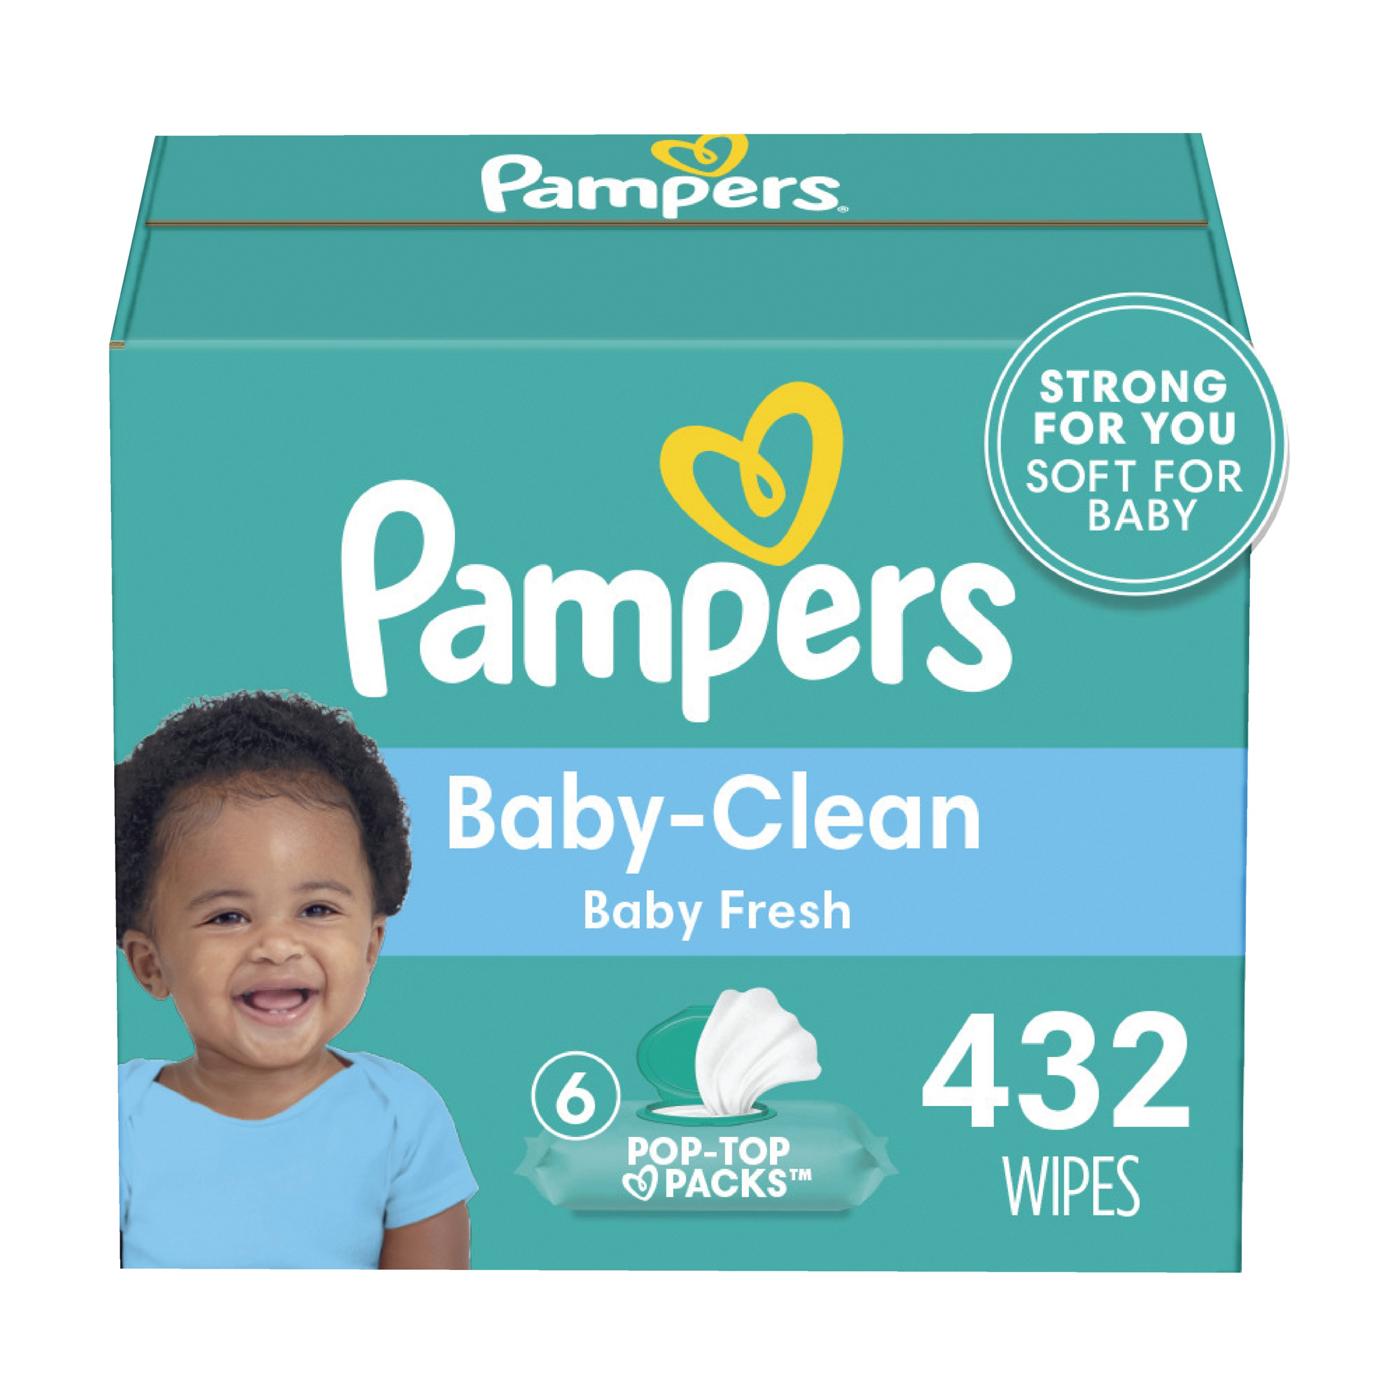 Pampers Fresh Scented Baby Wipes 6 Pk; image 1 of 11